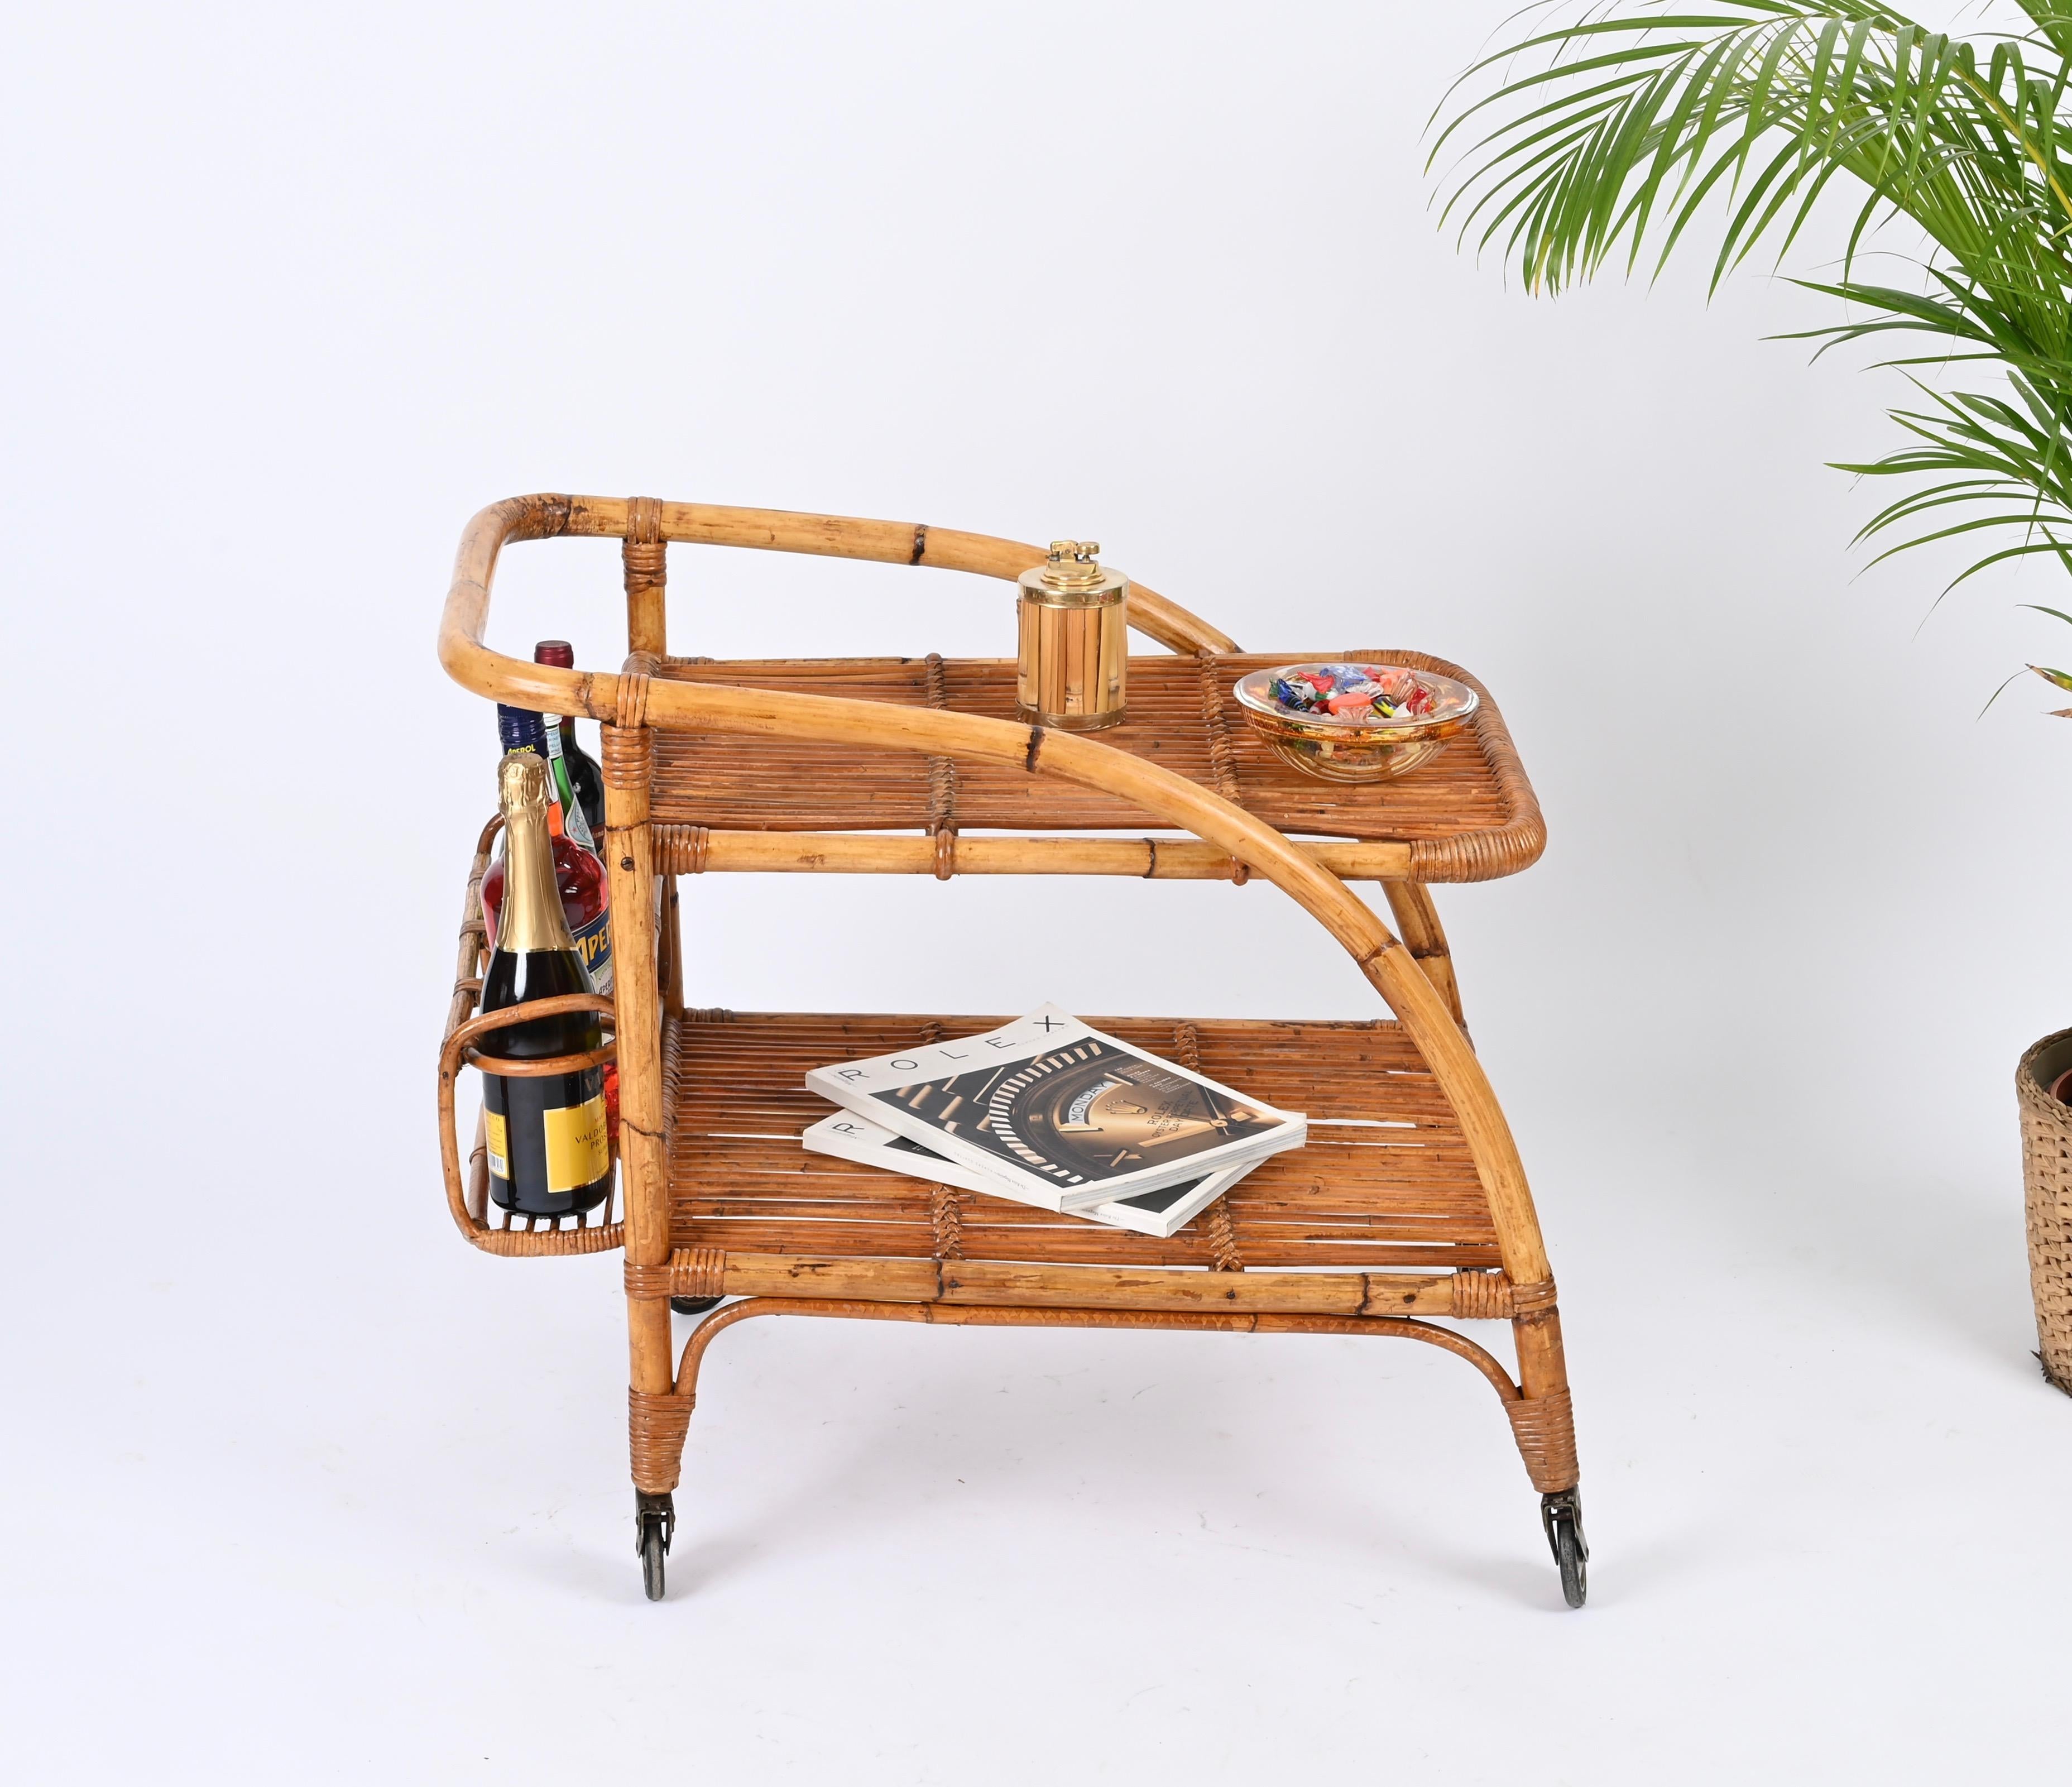 Midcentury French Riviera Rattan and Wicker Serving Bar Cart Trolley, Italy 1960 For Sale 2